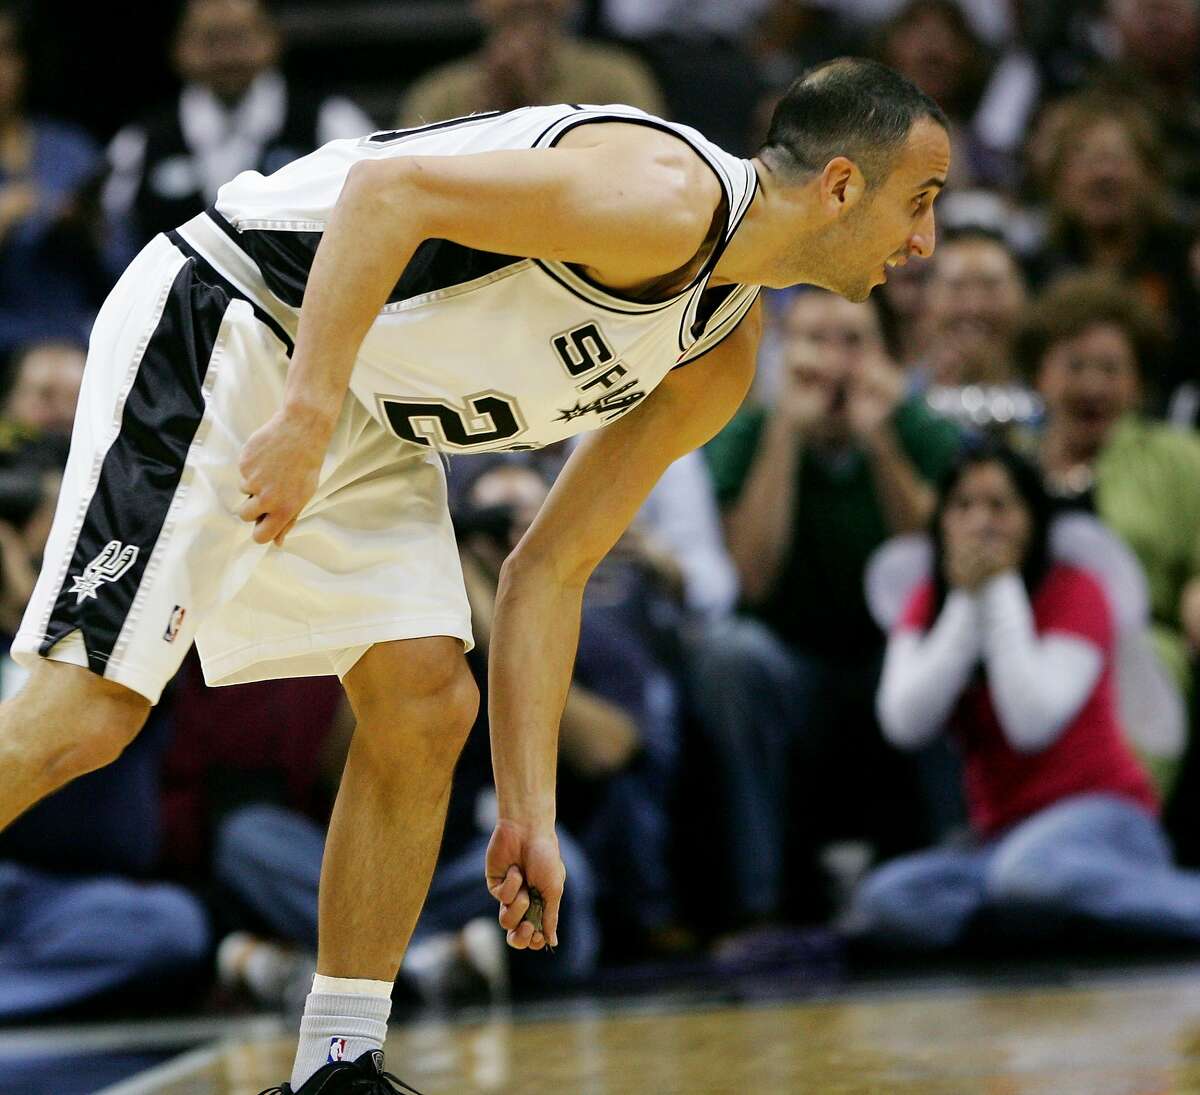 San Antonio Spurs guard Manu Ginobili picks up a bat to remove it from the court after swatting the animal from the air as it flew around the AT&T Center during the first half of an NBA basketball game against the Sacramento Kings, Saturday, Oct. 31, 2009, in San Antonio. (AP Photo/Darren Abate)